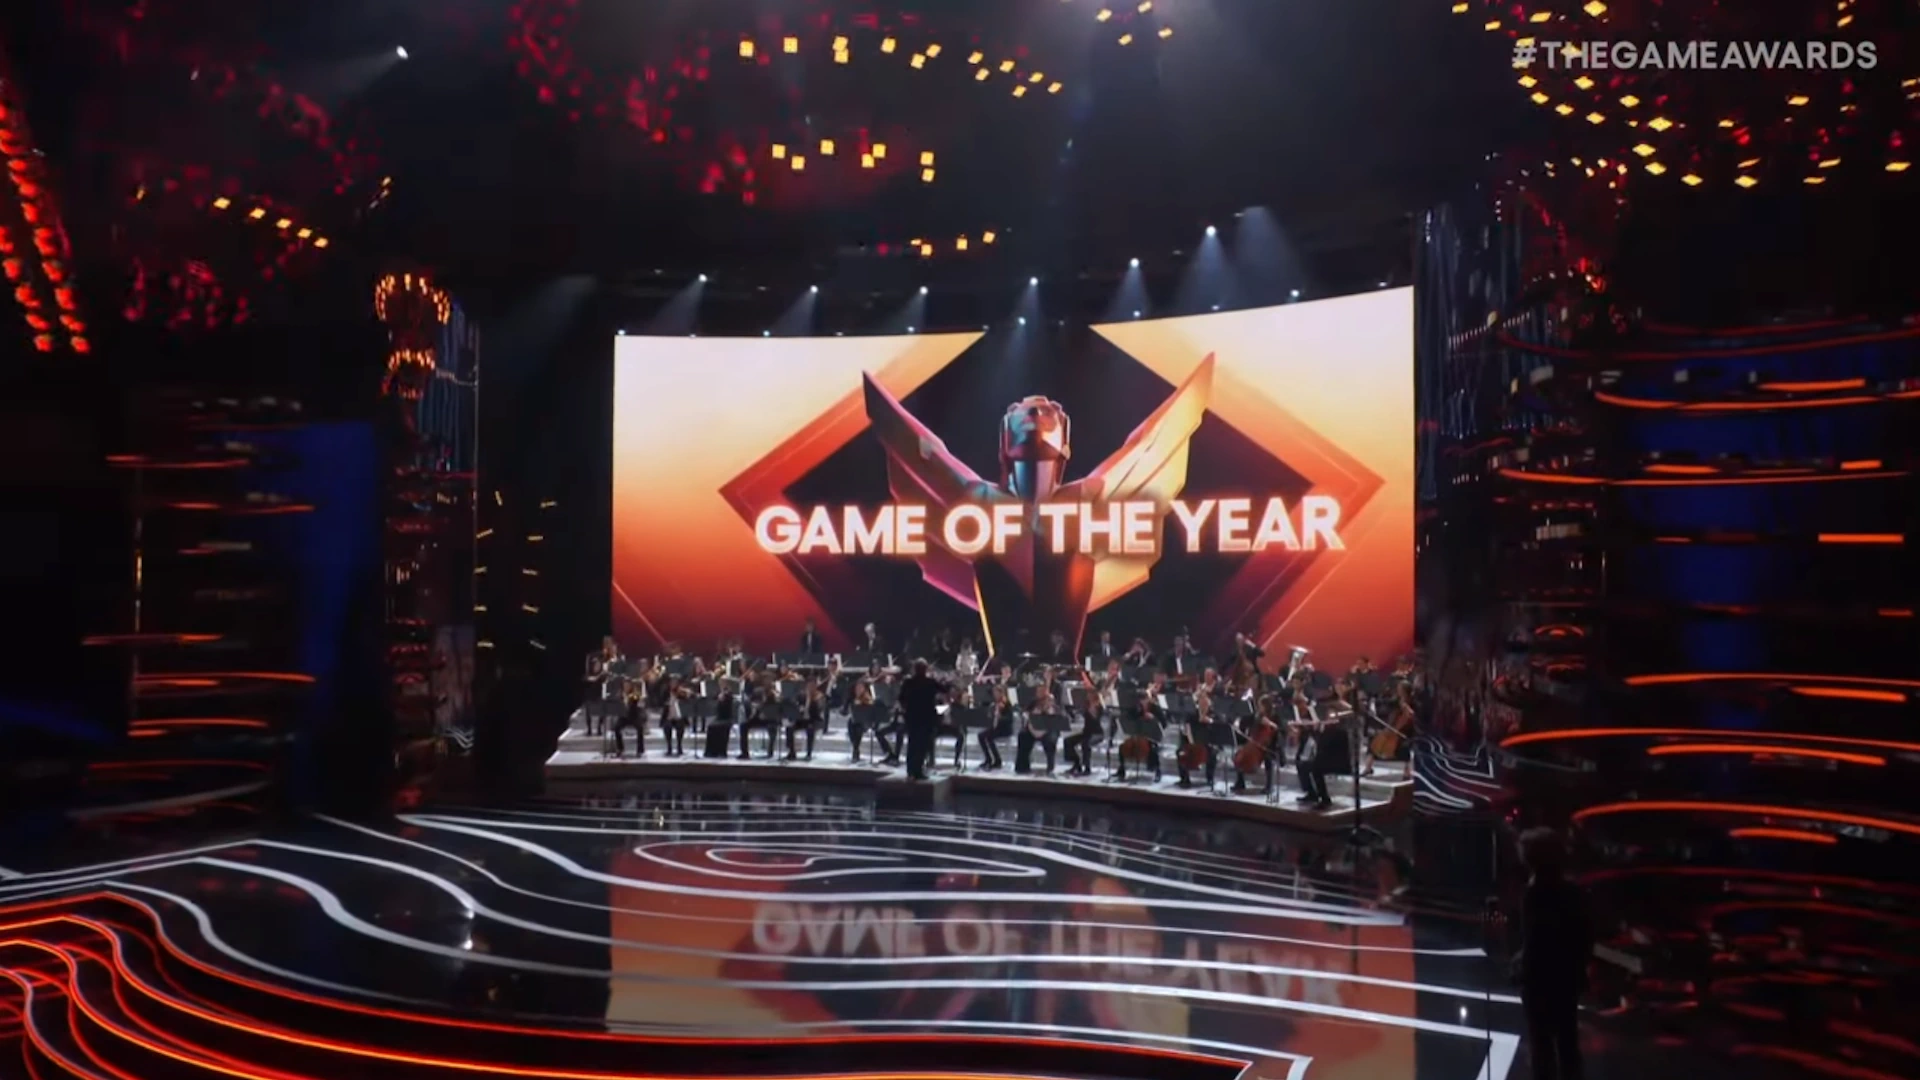 The best games of the year announced at The Game Awards 2023 event